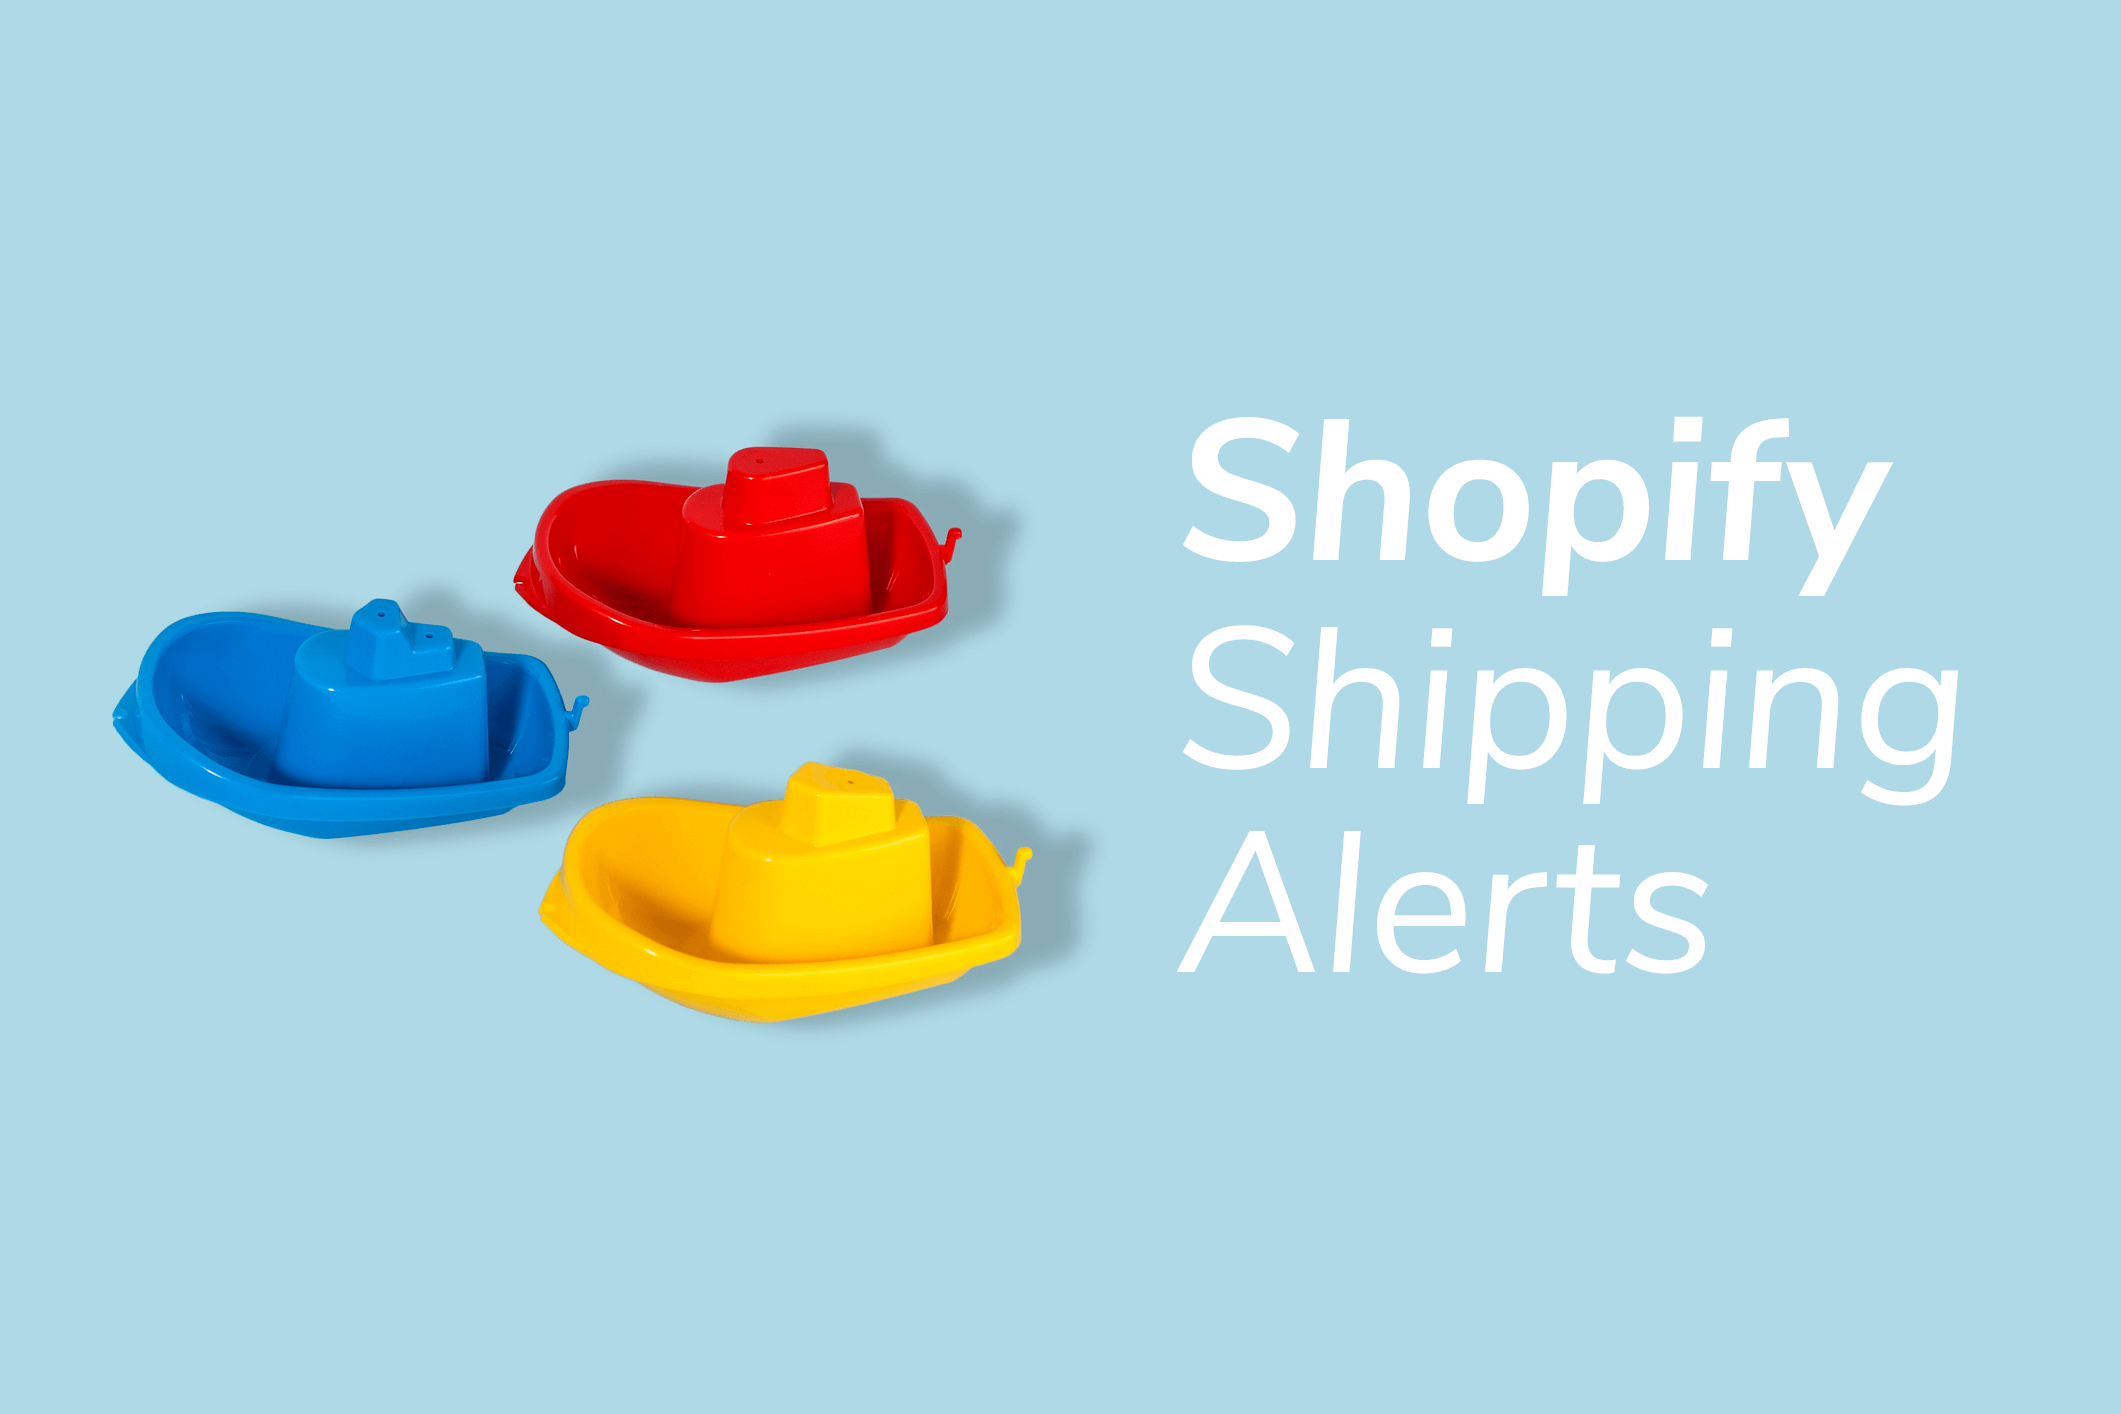 Improve Customer Experiences with Shopify Shipping Updates